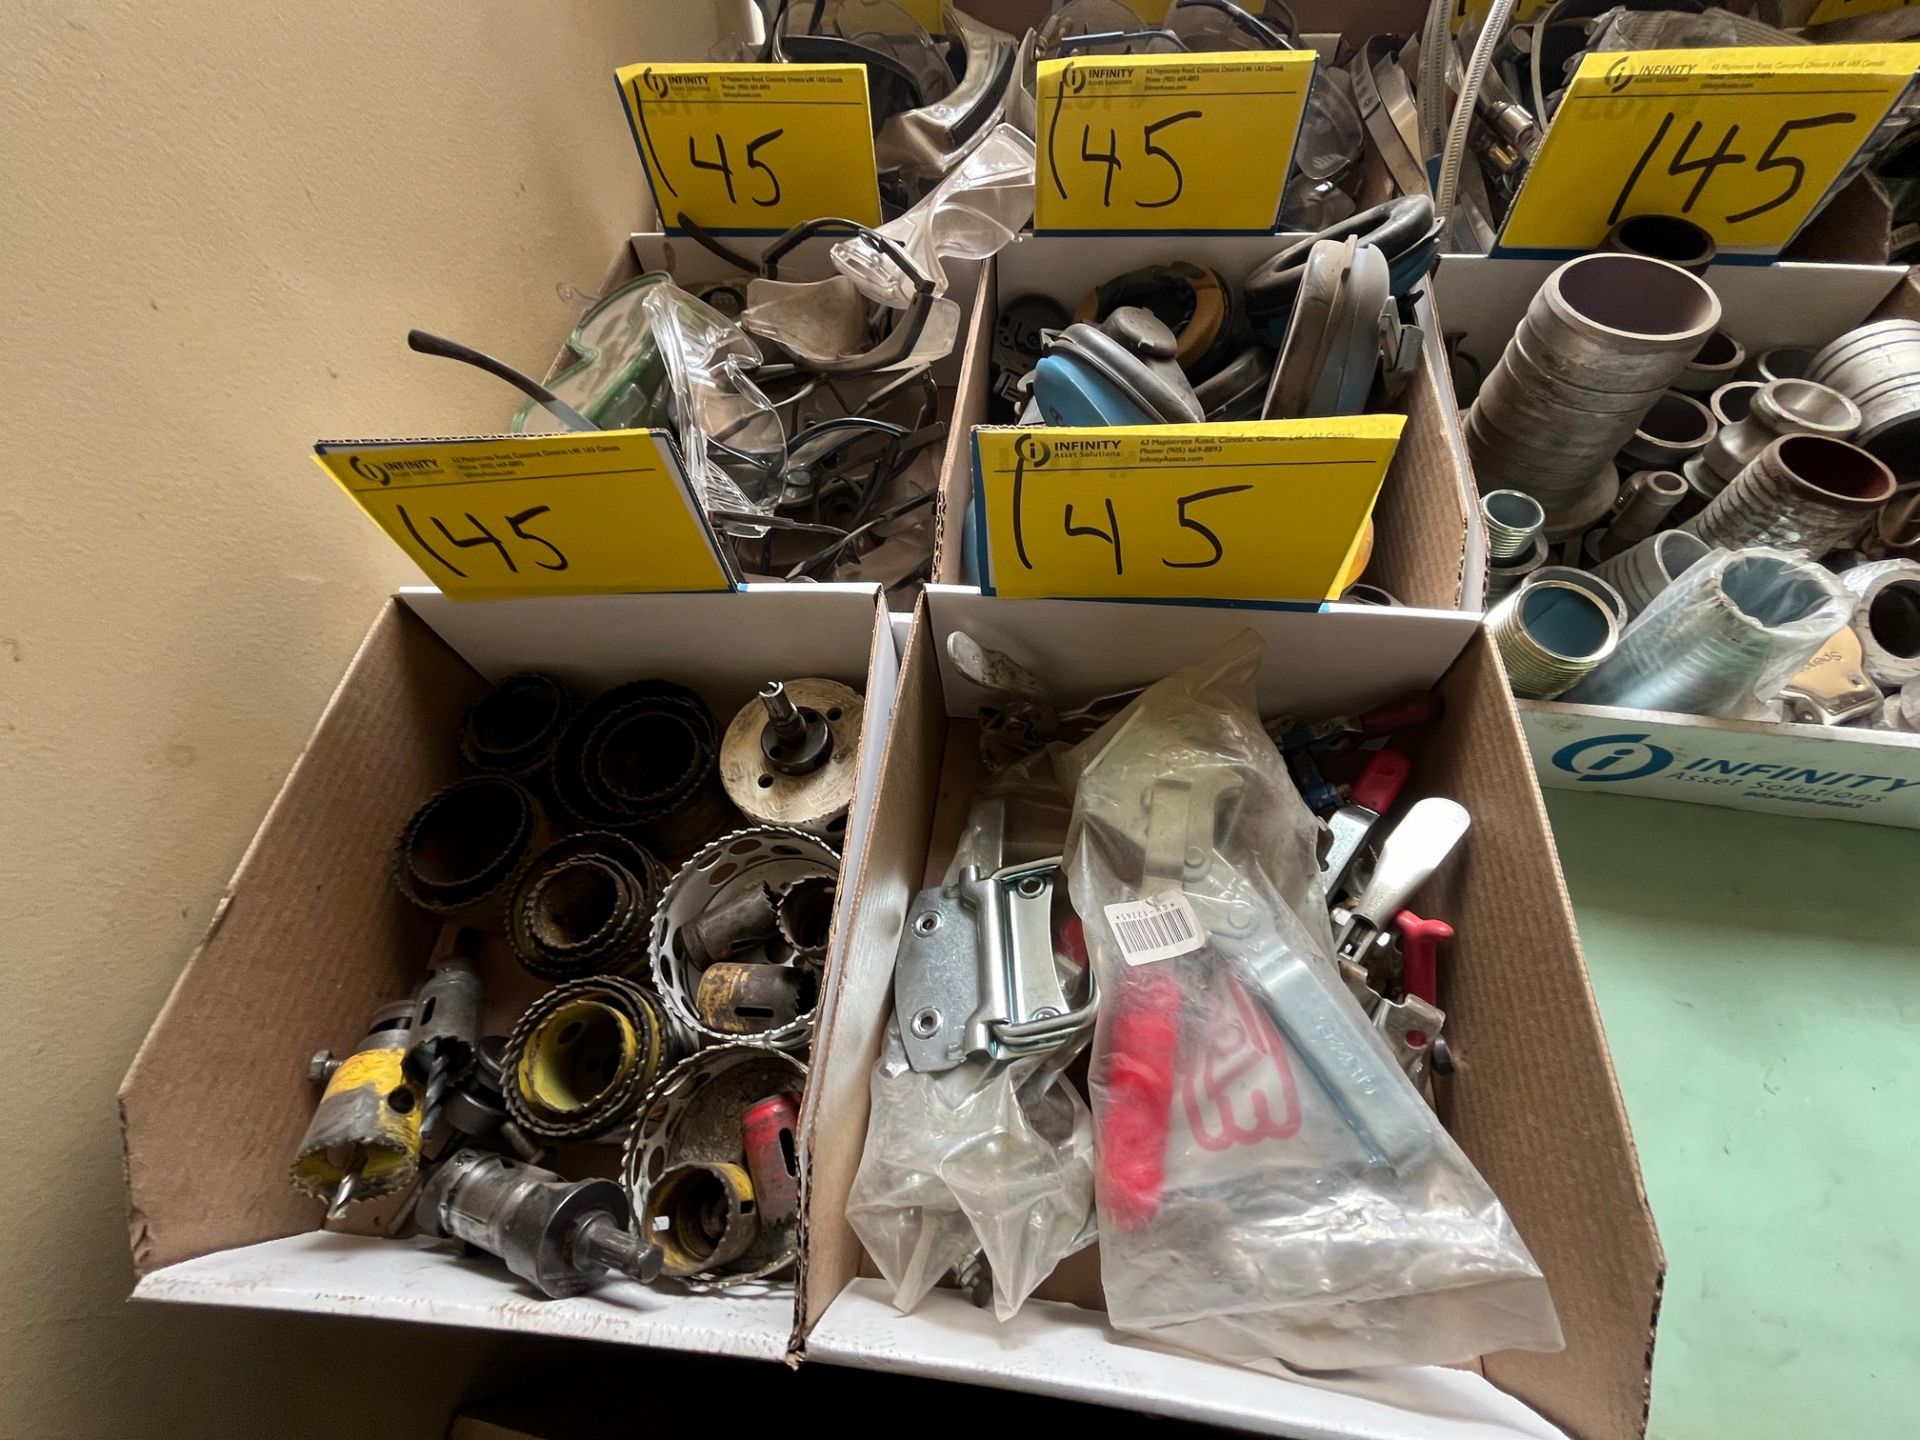 LOT OF (11) BOXES W/ CONTENTS, WHOLE SAW BLADES, JIGS, SAFETY TOP, SAFETY GLASSES, STAINLESS CLAMPS, - Image 3 of 5